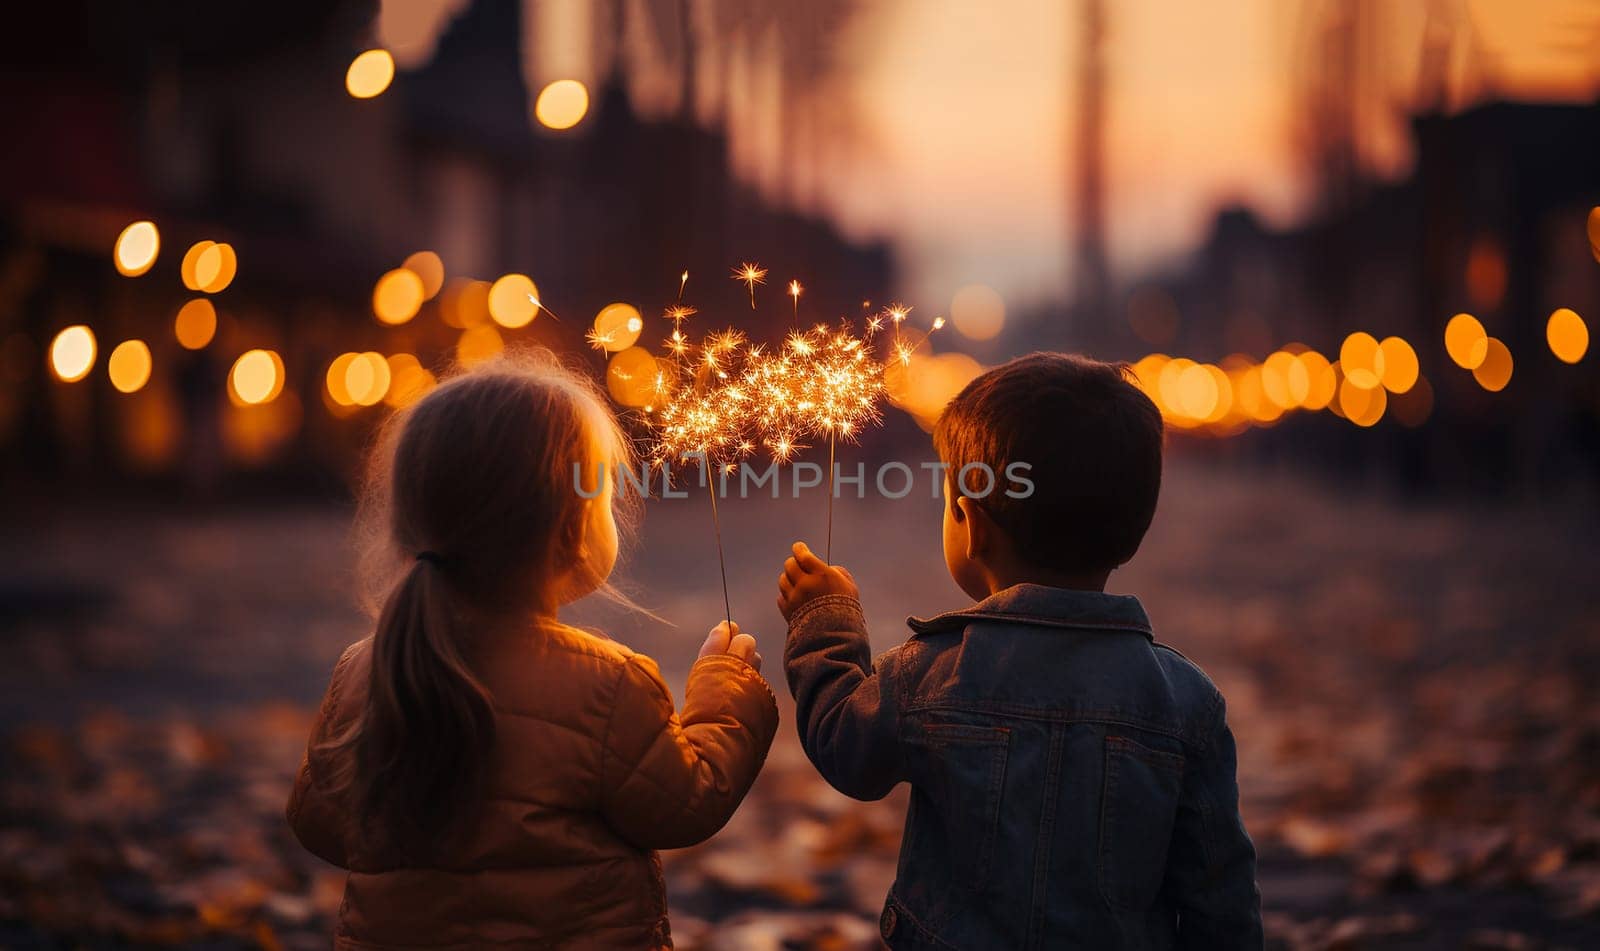 Children with fireworks stick. Holiday dynamic postcard. Happy children holding a lighted fireworks on a blurred background of a bright Christmas garland. Meeting the new year. Christmas evening Happy New Year concept by Annebel146